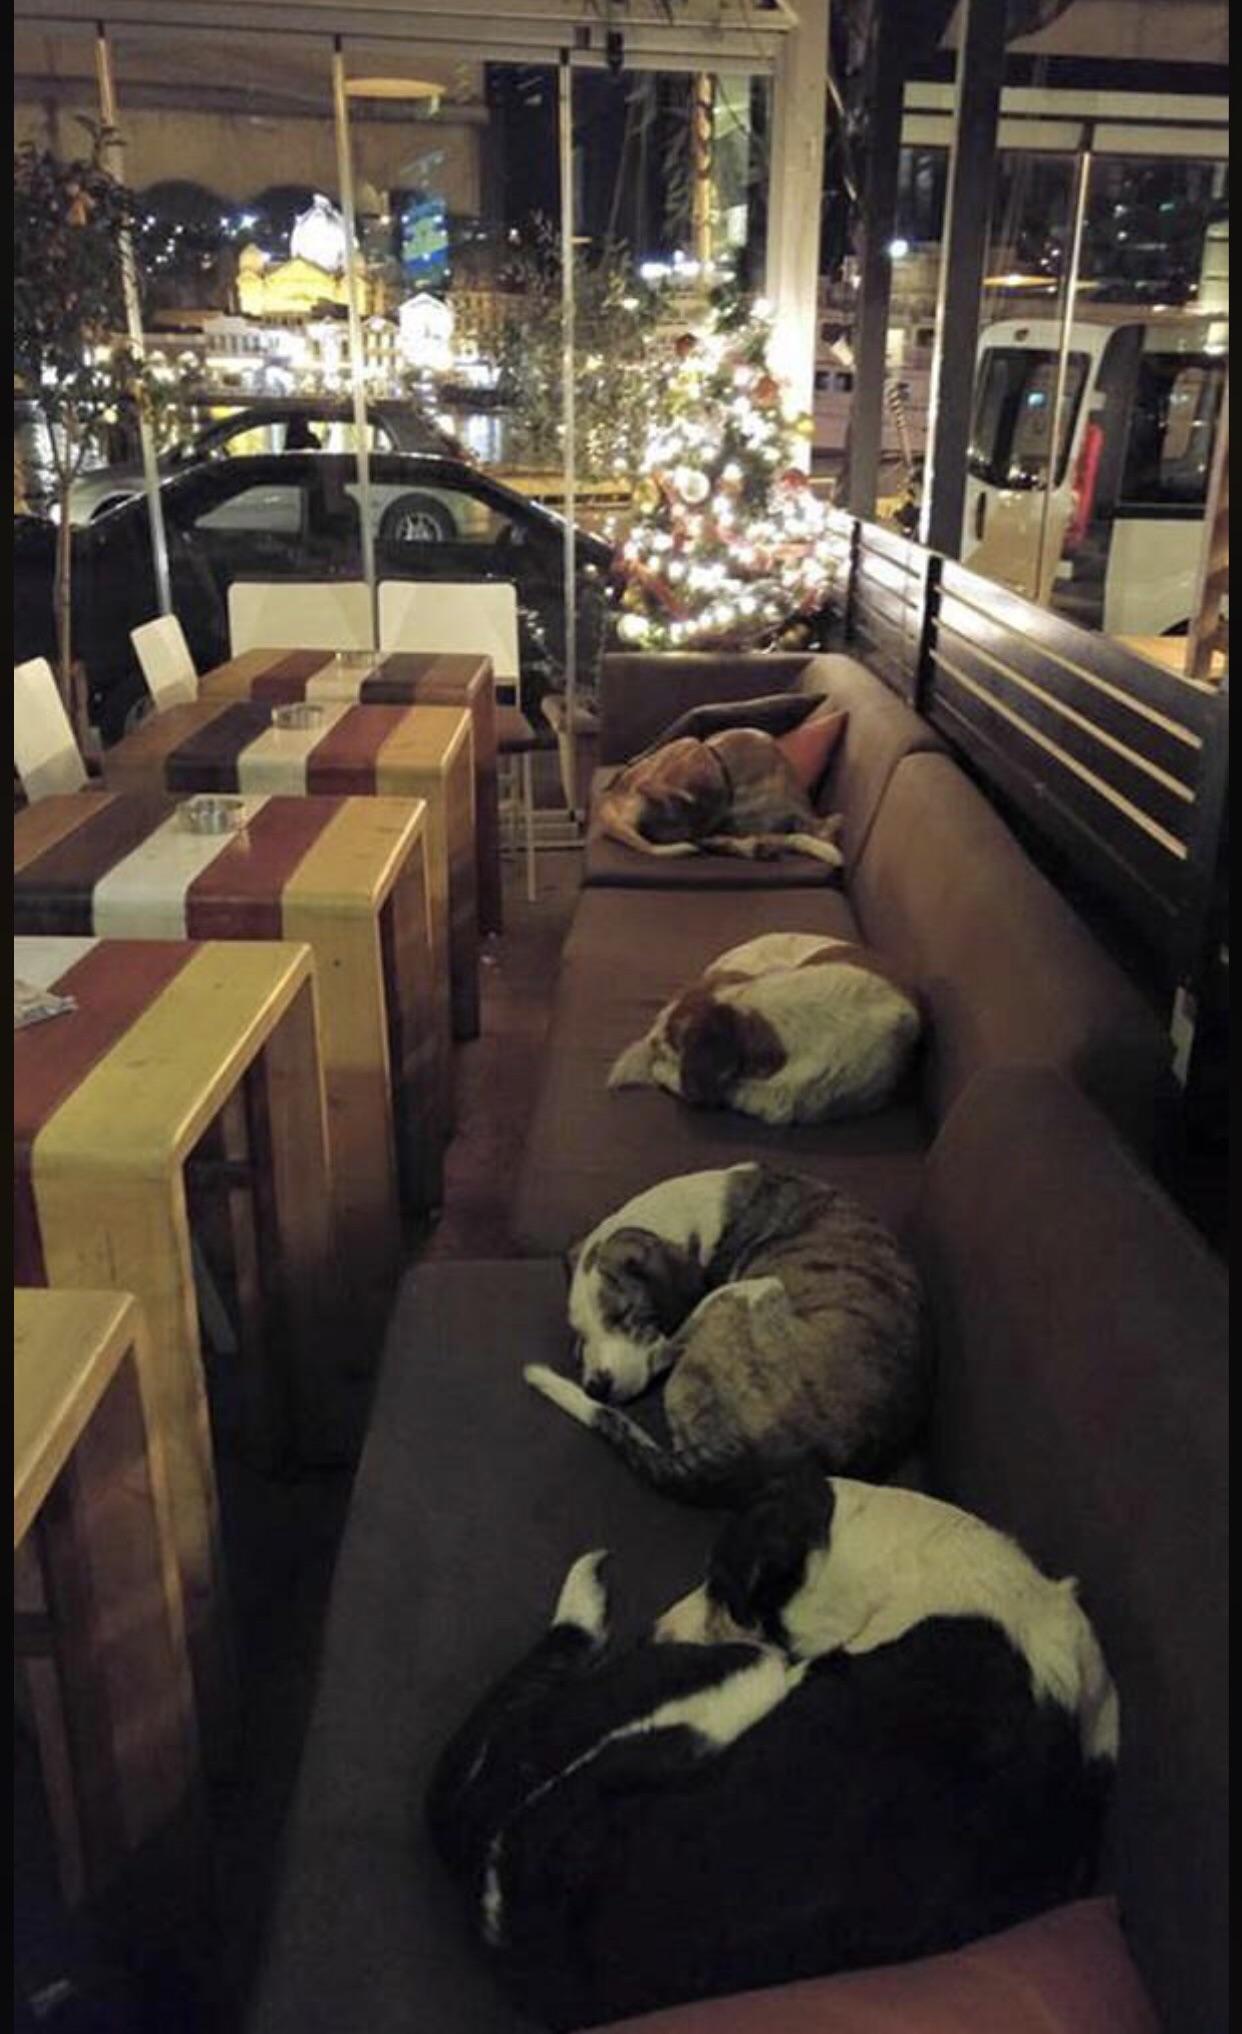 This coffee shop in Greece lets the stray dogs sleep inside every night after the customers leave.